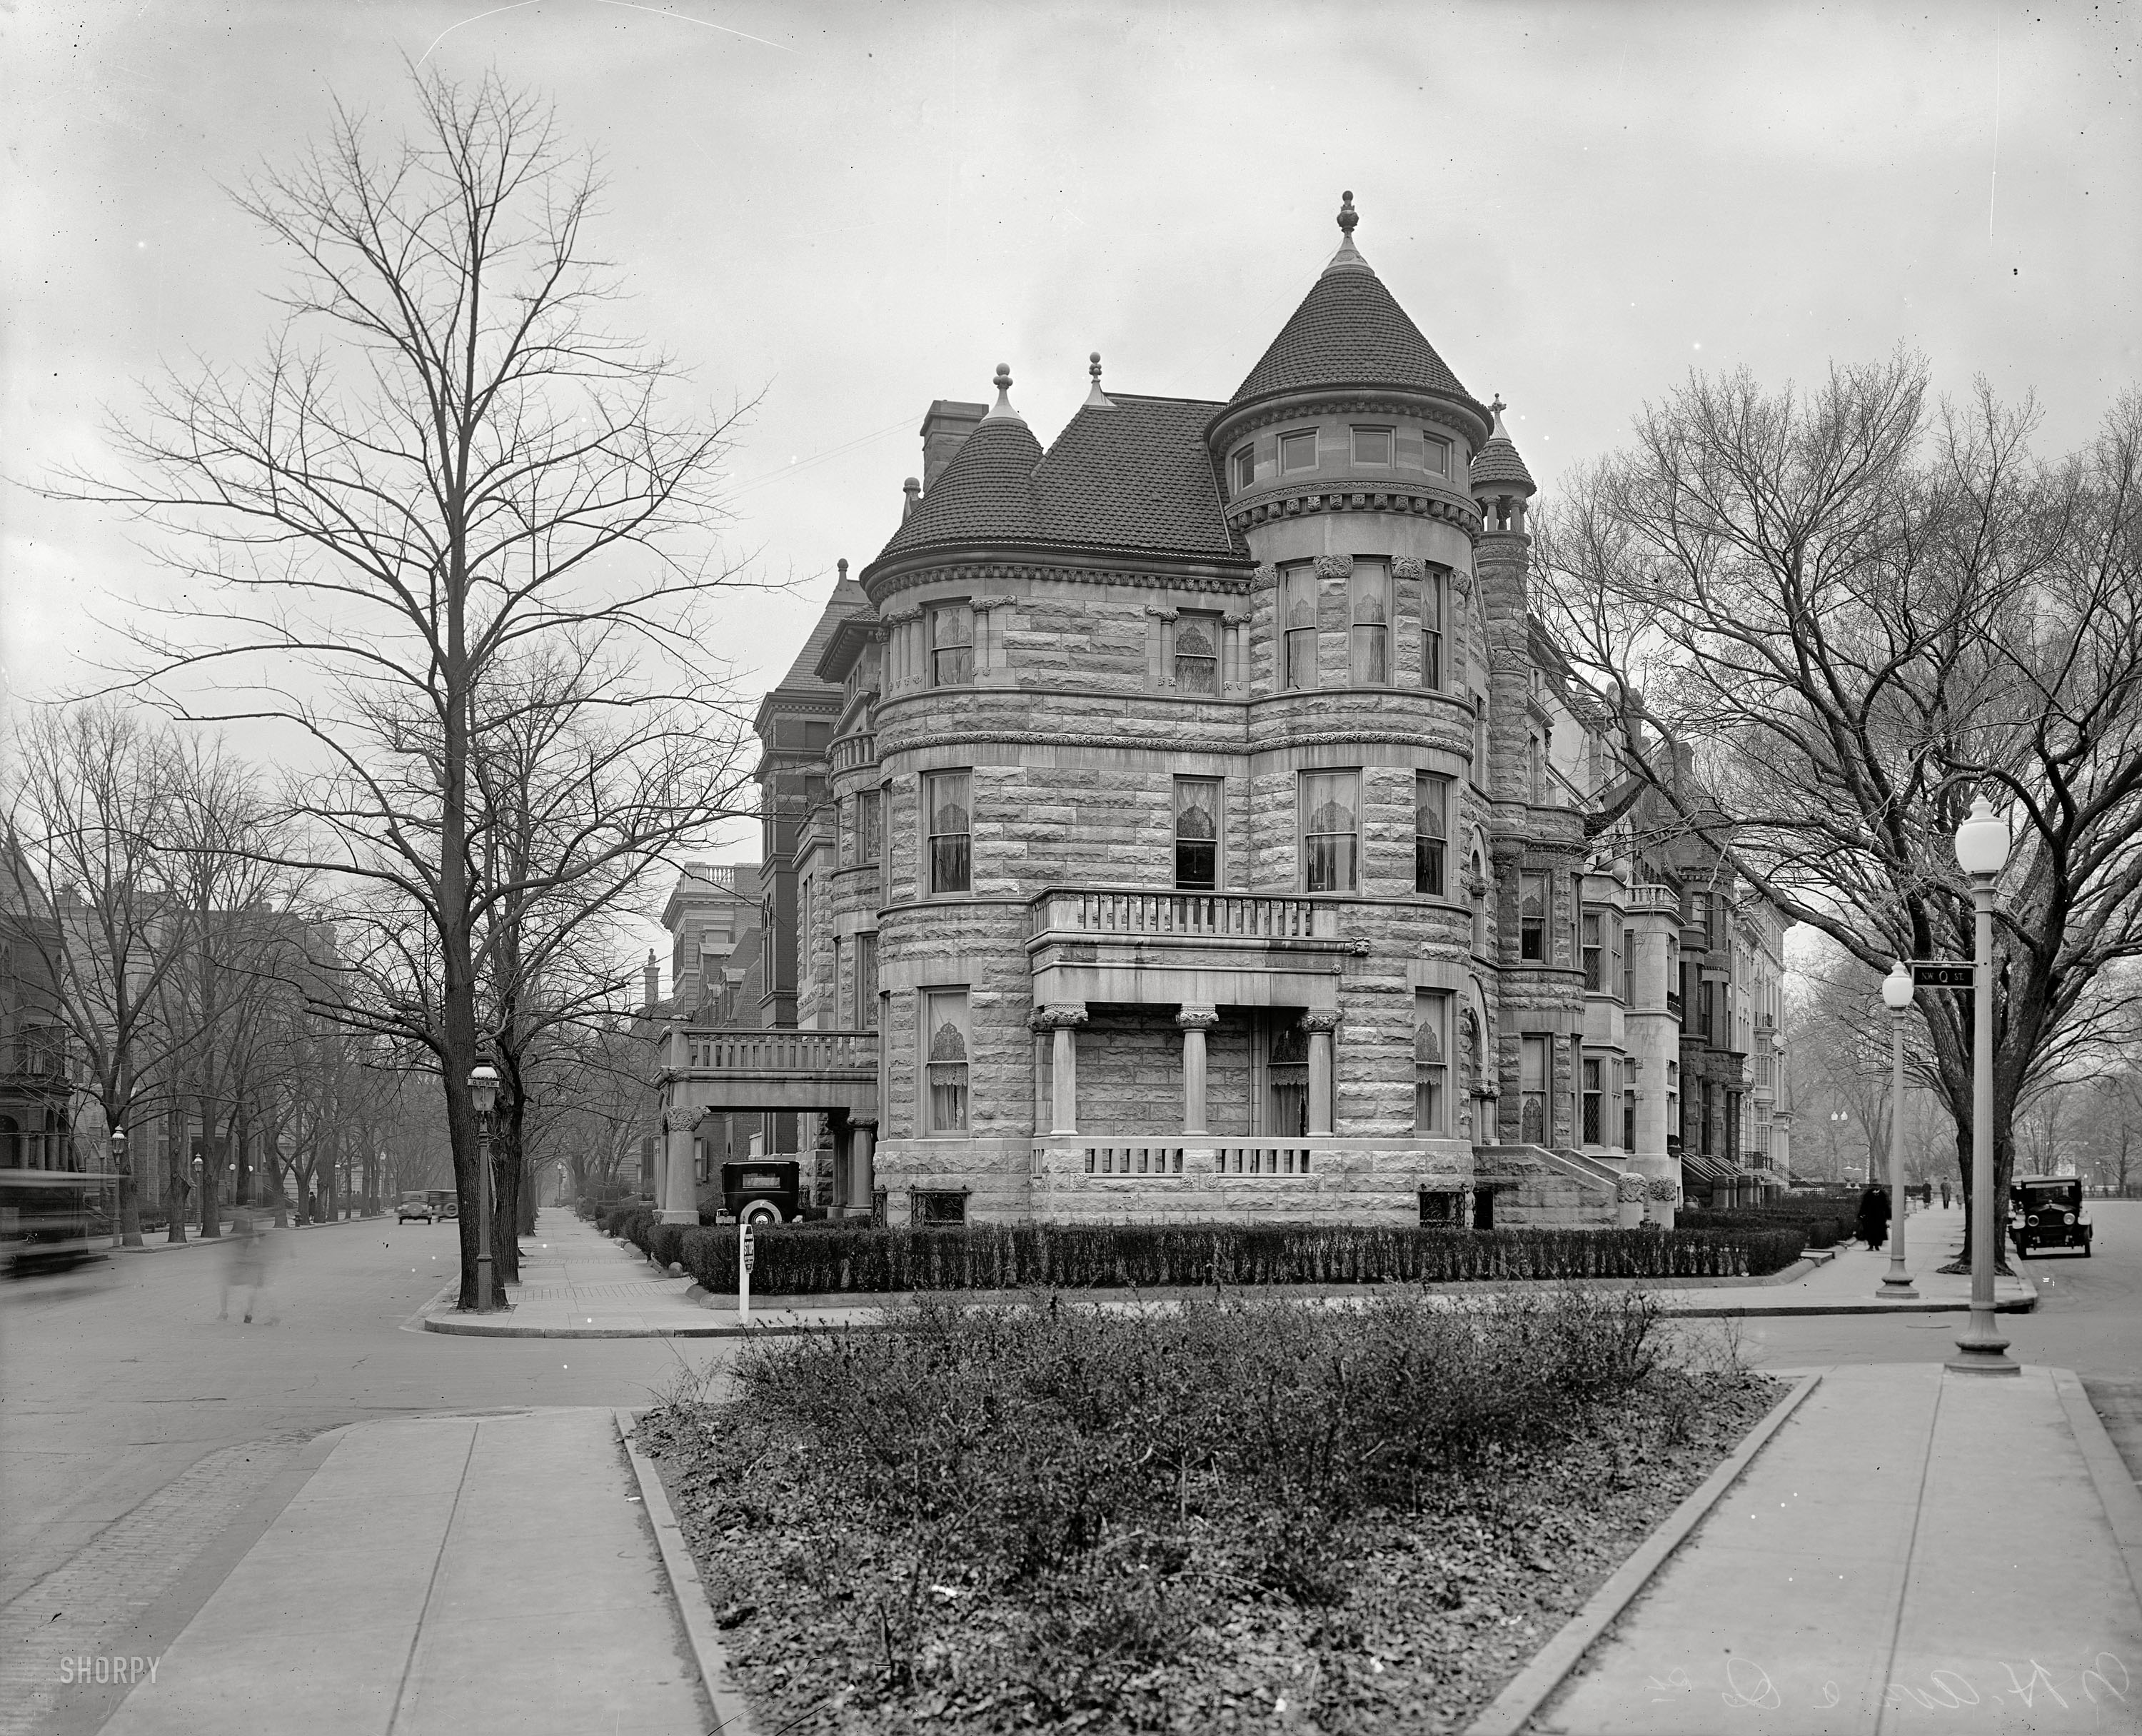 Washington, D.C., circa 1925. "Panama Legation, New Hampshire Avenue and Q Street N.W." 18th Street is on the left and New Hampshire Avenue on the right. This is one of the earliest examples of a stop sign ("Boulevard Stop") in the archive. National Photo Company Collection glass negative. View full size.